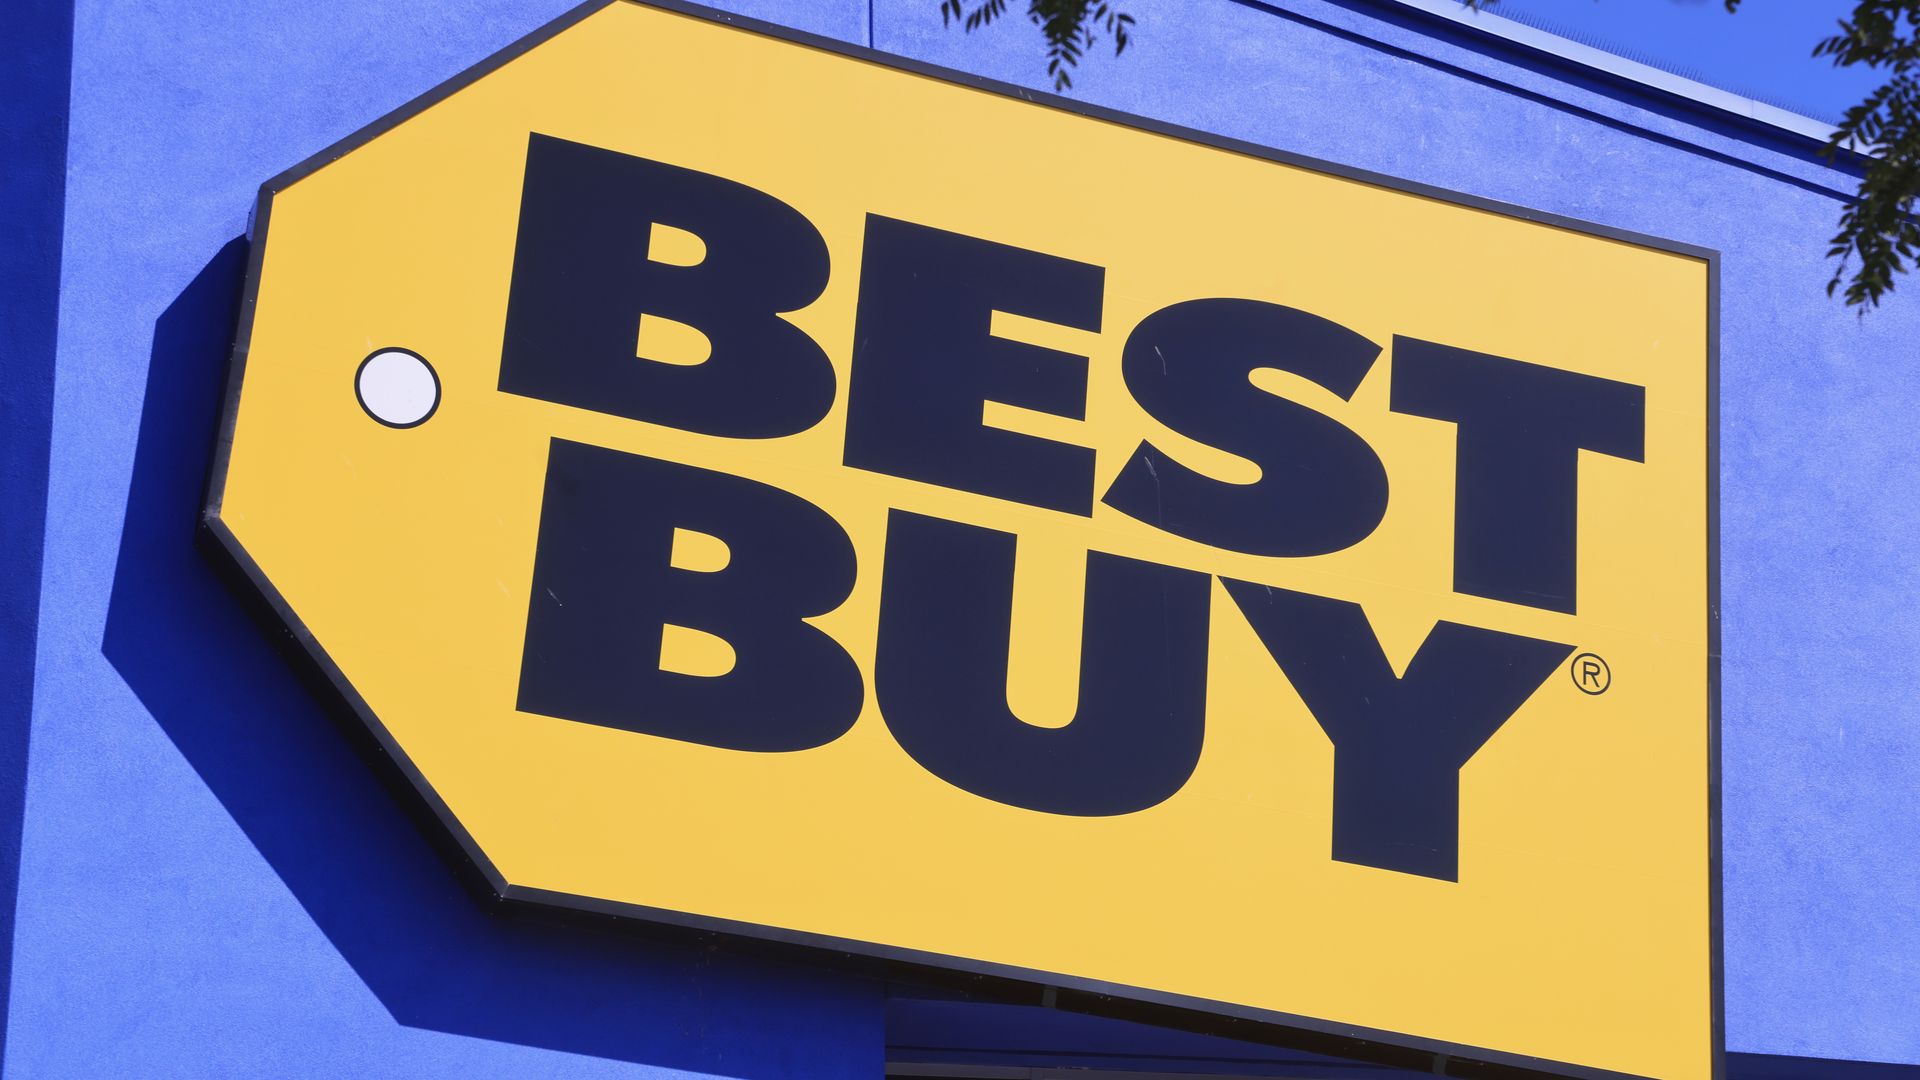 Best Buy Black Friday 2022 sale dates unveiled, stores closed Thanksgiving